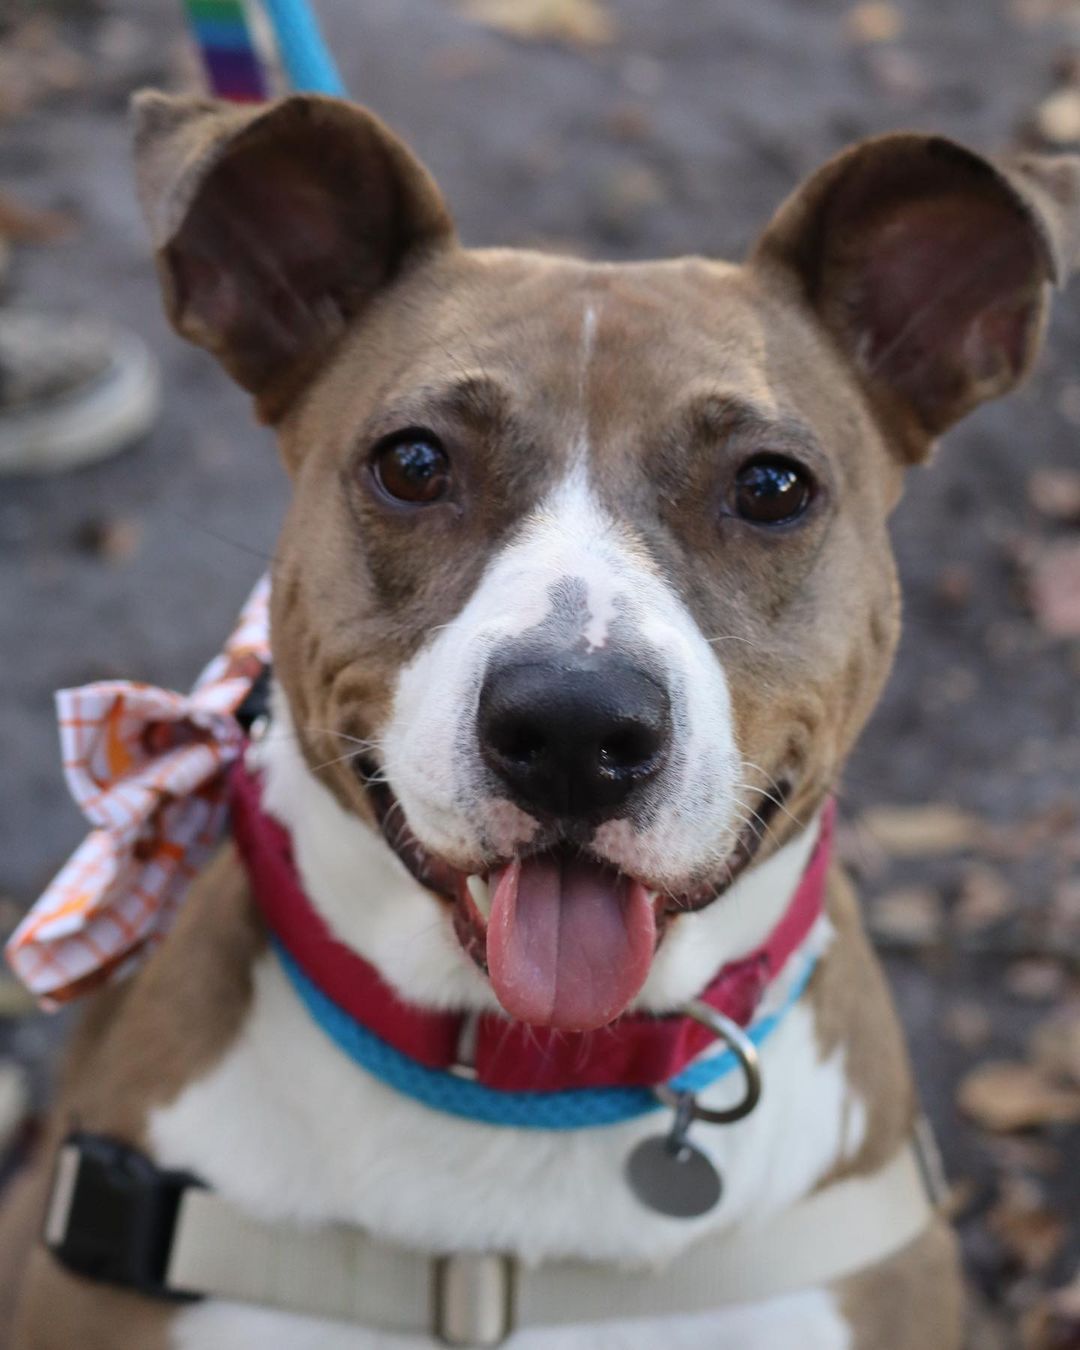 Girlie’s been with Pet Helpers for 208 days, but this week, we’d love to give her something to be thankful for 🦃🥰

This sweet 3 year old pup, along with all shelter pets aged 1 year and older, will be available for a fraction of the regular adoption fee this Saturday from 12-6 for our “Home for the Holidays” Adoption Event and Pet Supply Sale. 

We will be pulling out adoption specials as high as 40% off from Santa Paws’ hat, selling brand new collars, leashes, and harnesses, as well as hosting a silent auction to help provide for the costs of sheltering longterm pets like Girlie 🎅

Meet more adoptables at pethelpers.org and be sure to mark your calendars for our Home for the Holidays Adoption Event and Sale this coming Saturday from 12-6 🐾

.
.
.
.
.
.
<a target='_blank' href='https://www.instagram.com/explore/tags/petphotography/'>#petphotography</a> <a target='_blank' href='https://www.instagram.com/explore/tags/dogportrait/'>#dogportrait</a> <a target='_blank' href='https://www.instagram.com/explore/tags/dogportraits/'>#dogportraits</a> <a target='_blank' href='https://www.instagram.com/explore/tags/petportrait/'>#petportrait</a> <a target='_blank' href='https://www.instagram.com/explore/tags/petsofinstagram/'>#petsofinstagram</a> <a target='_blank' href='https://www.instagram.com/explore/tags/dogsofinstagram/'>#dogsofinstagram</a> <a target='_blank' href='https://www.instagram.com/explore/tags/charleston/'>#charleston</a> <a target='_blank' href='https://www.instagram.com/explore/tags/lowcountry/'>#lowcountry</a> <a target='_blank' href='https://www.instagram.com/explore/tags/lowcountryliving/'>#lowcountryliving</a> <a target='_blank' href='https://www.instagram.com/explore/tags/fall/'>#fall</a> <a target='_blank' href='https://www.instagram.com/explore/tags/thanksgiving/'>#thanksgiving</a> <a target='_blank' href='https://www.instagram.com/explore/tags/thanksgiving2021/'>#thanksgiving2021</a> <a target='_blank' href='https://www.instagram.com/explore/tags/smallbusinesssaturday/'>#smallbusinesssaturday</a> <a target='_blank' href='https://www.instagram.com/explore/tags/blackfriday/'>#blackfriday</a> <a target='_blank' href='https://www.instagram.com/explore/tags/shelter/'>#shelter</a> <a target='_blank' href='https://www.instagram.com/explore/tags/shelterdog/'>#shelterdog</a> <a target='_blank' href='https://www.instagram.com/explore/tags/thankful/'>#thankful</a> <a target='_blank' href='https://www.instagram.com/explore/tags/rescue/'>#rescue</a> <a target='_blank' href='https://www.instagram.com/explore/tags/rescuedog/'>#rescuedog</a> <a target='_blank' href='https://www.instagram.com/explore/tags/shelterdogsofinstagram/'>#shelterdogsofinstagram</a> <a target='_blank' href='https://www.instagram.com/explore/tags/rescuedismyfavoritebreed/'>#rescuedismyfavoritebreed</a> <a target='_blank' href='https://www.instagram.com/explore/tags/rescuedogsofinstagram/'>#rescuedogsofinstagram</a> <a target='_blank' href='https://www.instagram.com/explore/tags/adopt/'>#adopt</a> <a target='_blank' href='https://www.instagram.com/explore/tags/adoptme/'>#adoptme</a> <a target='_blank' href='https://www.instagram.com/explore/tags/adoptdontshop/'>#adoptdontshop</a> <a target='_blank' href='https://www.instagram.com/explore/tags/muttsofinstagram/'>#muttsofinstagram</a> <a target='_blank' href='https://www.instagram.com/explore/tags/mutt/'>#mutt</a> <a target='_blank' href='https://www.instagram.com/explore/tags/girlie/'>#girlie</a> <a target='_blank' href='https://www.instagram.com/explore/tags/southcarolina/'>#southcarolina</a> <a target='_blank' href='https://www.instagram.com/explore/tags/sc/'>#sc</a>